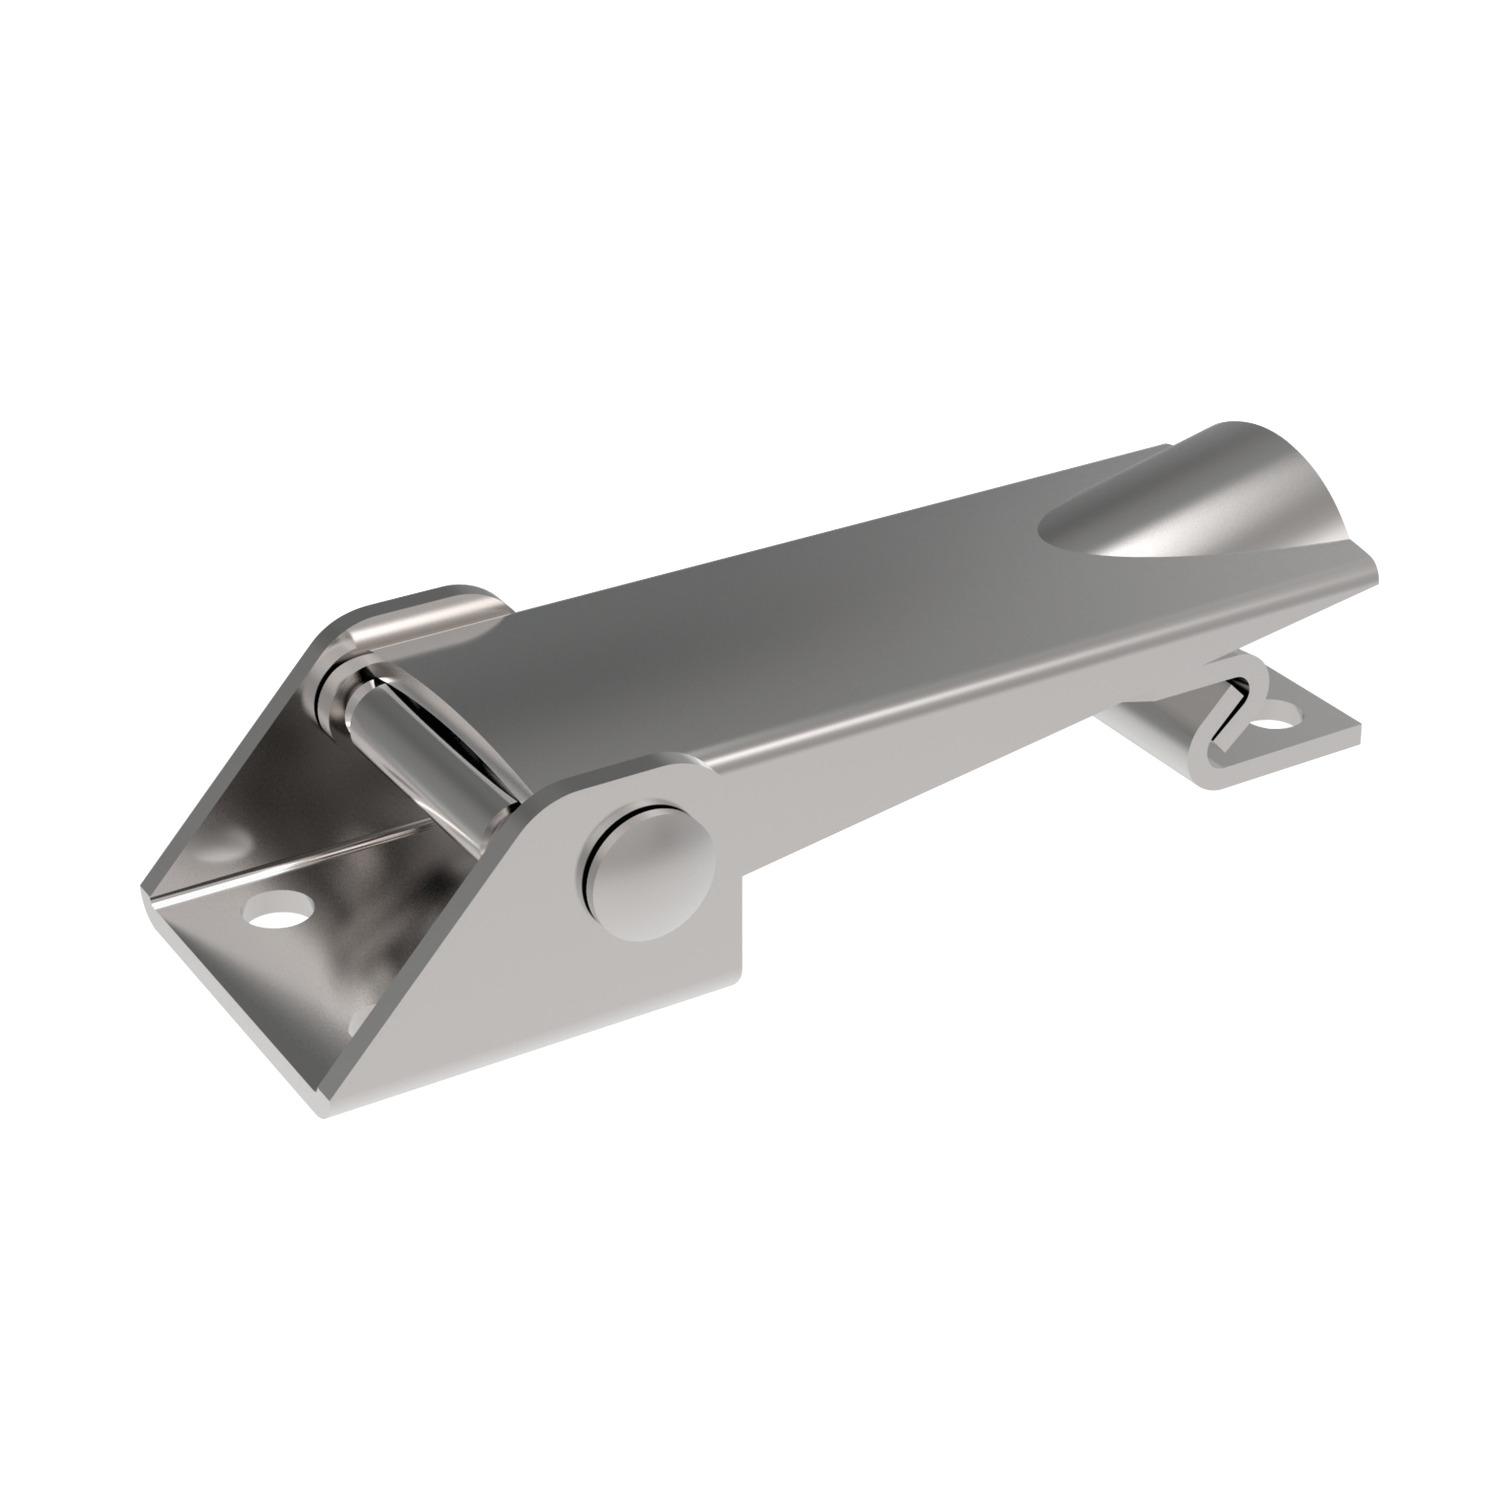 J0600.AC0030 Toggle Latches Stainless Steel - 60 to 70 - 16 - 25,5